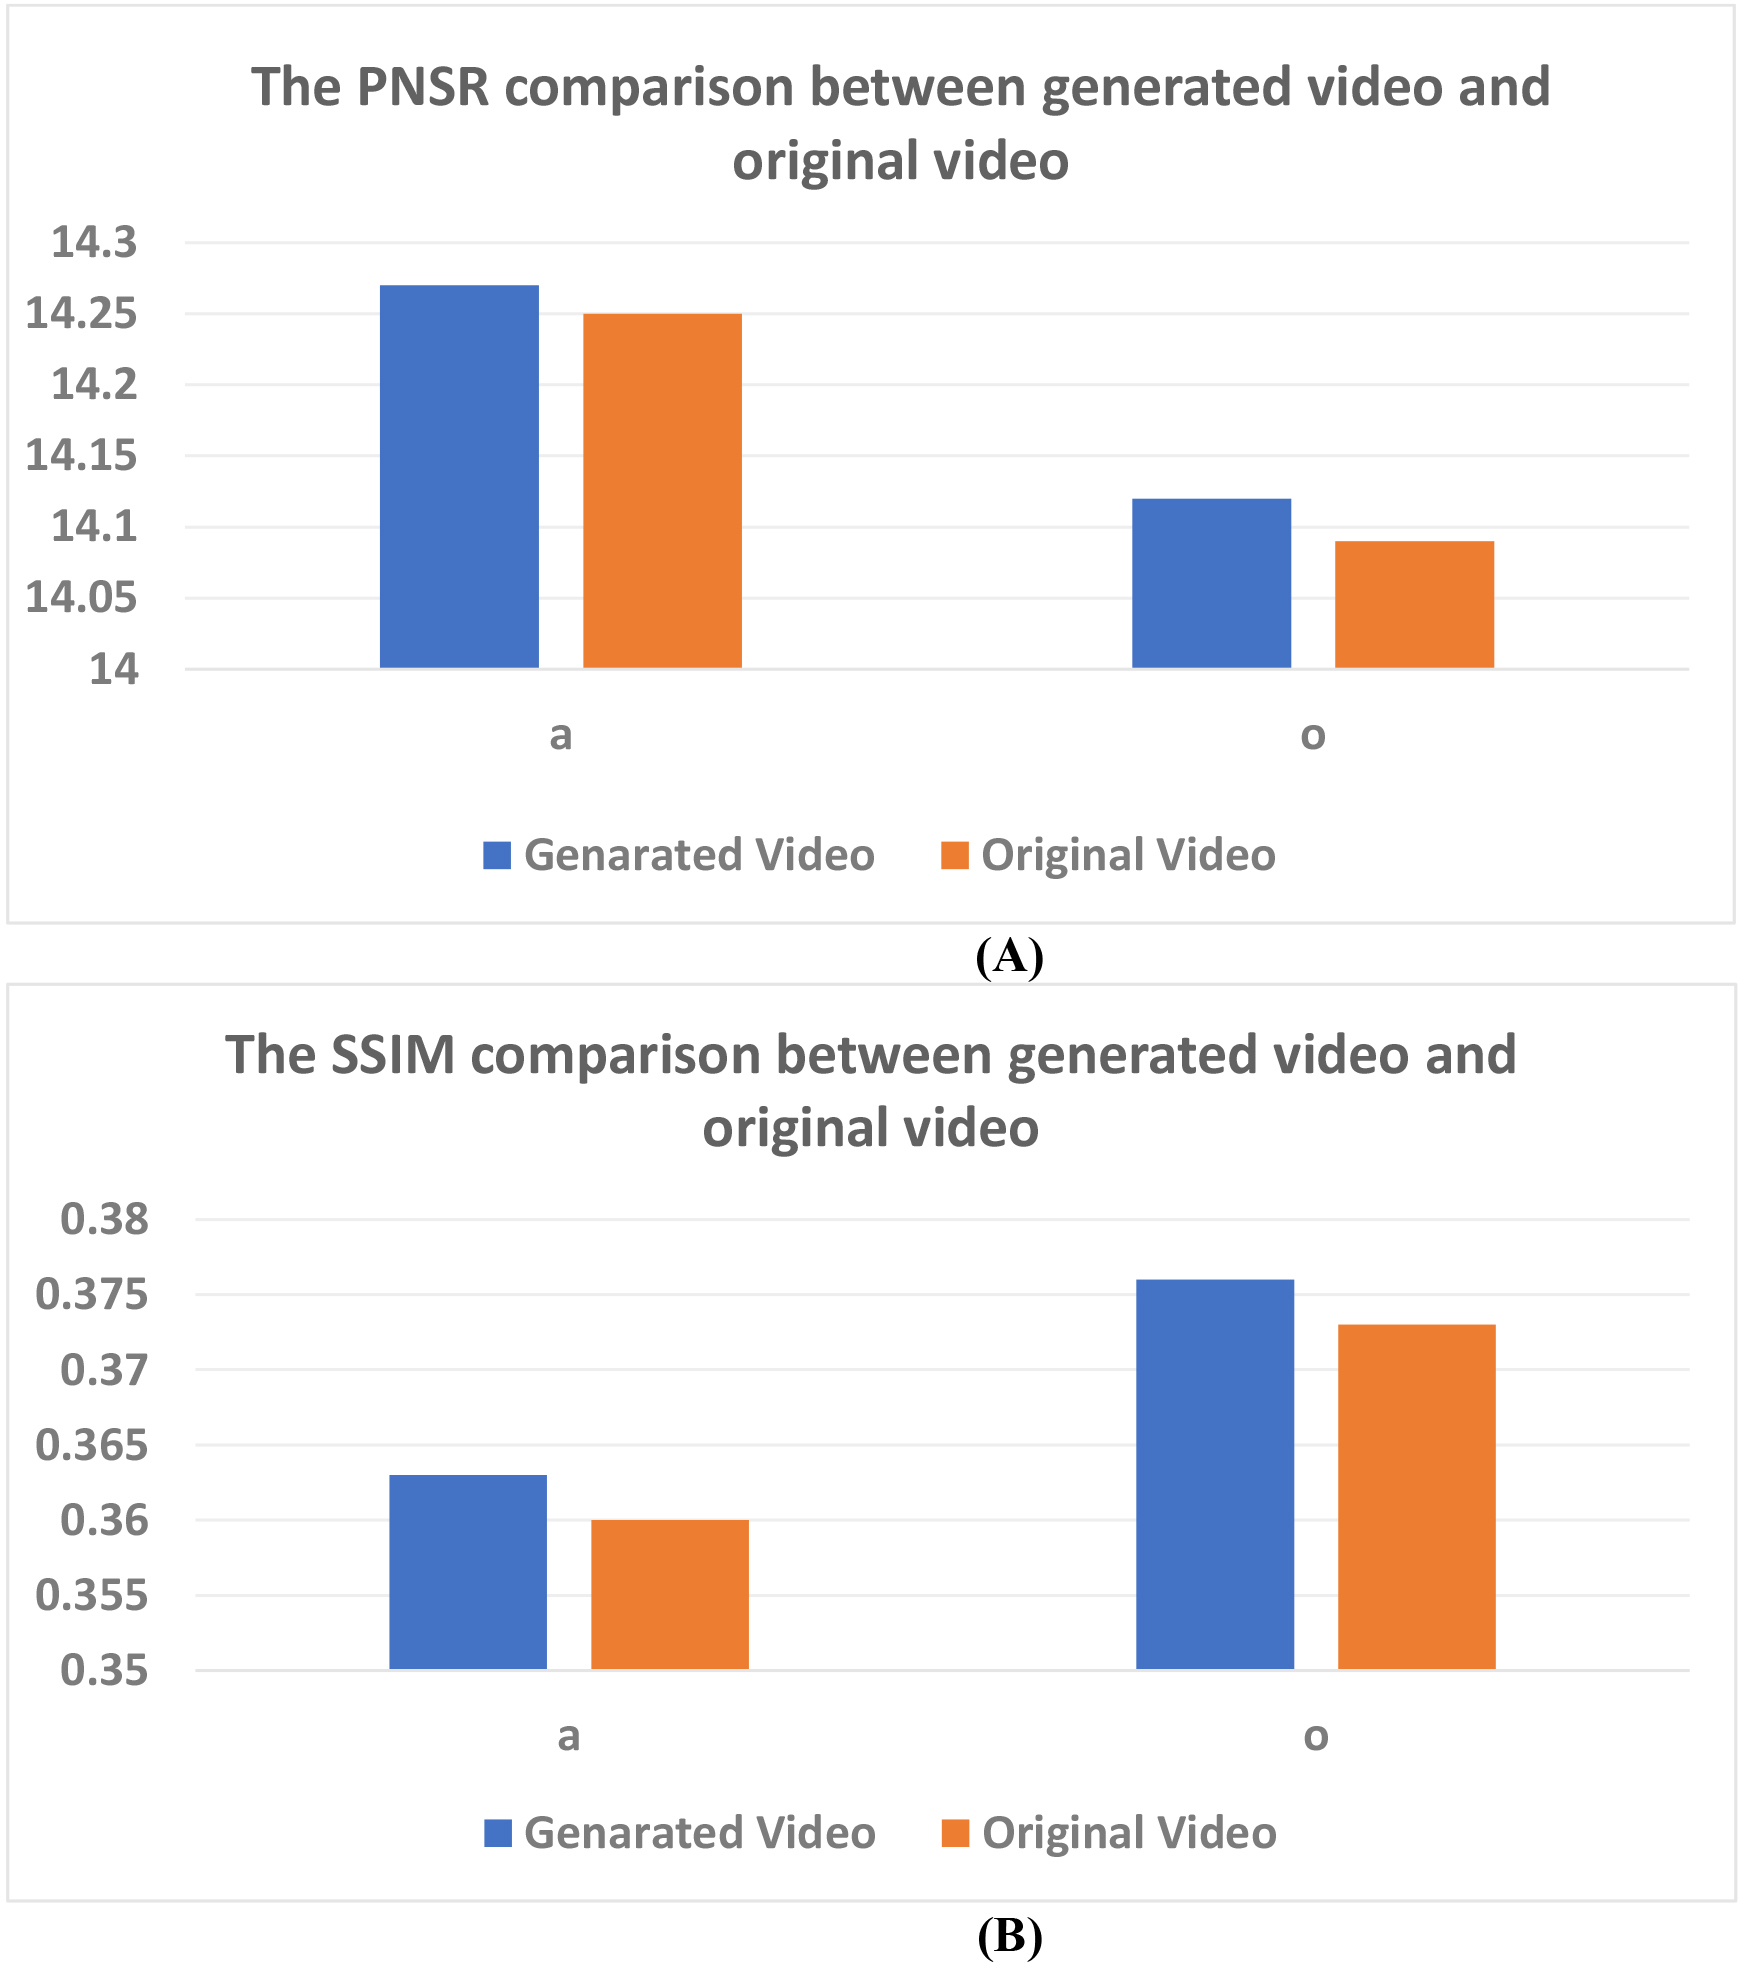 (A) The comparison between generated video and recording video for PNSR. (B) The comparison between generatied video and original video for SSIM.